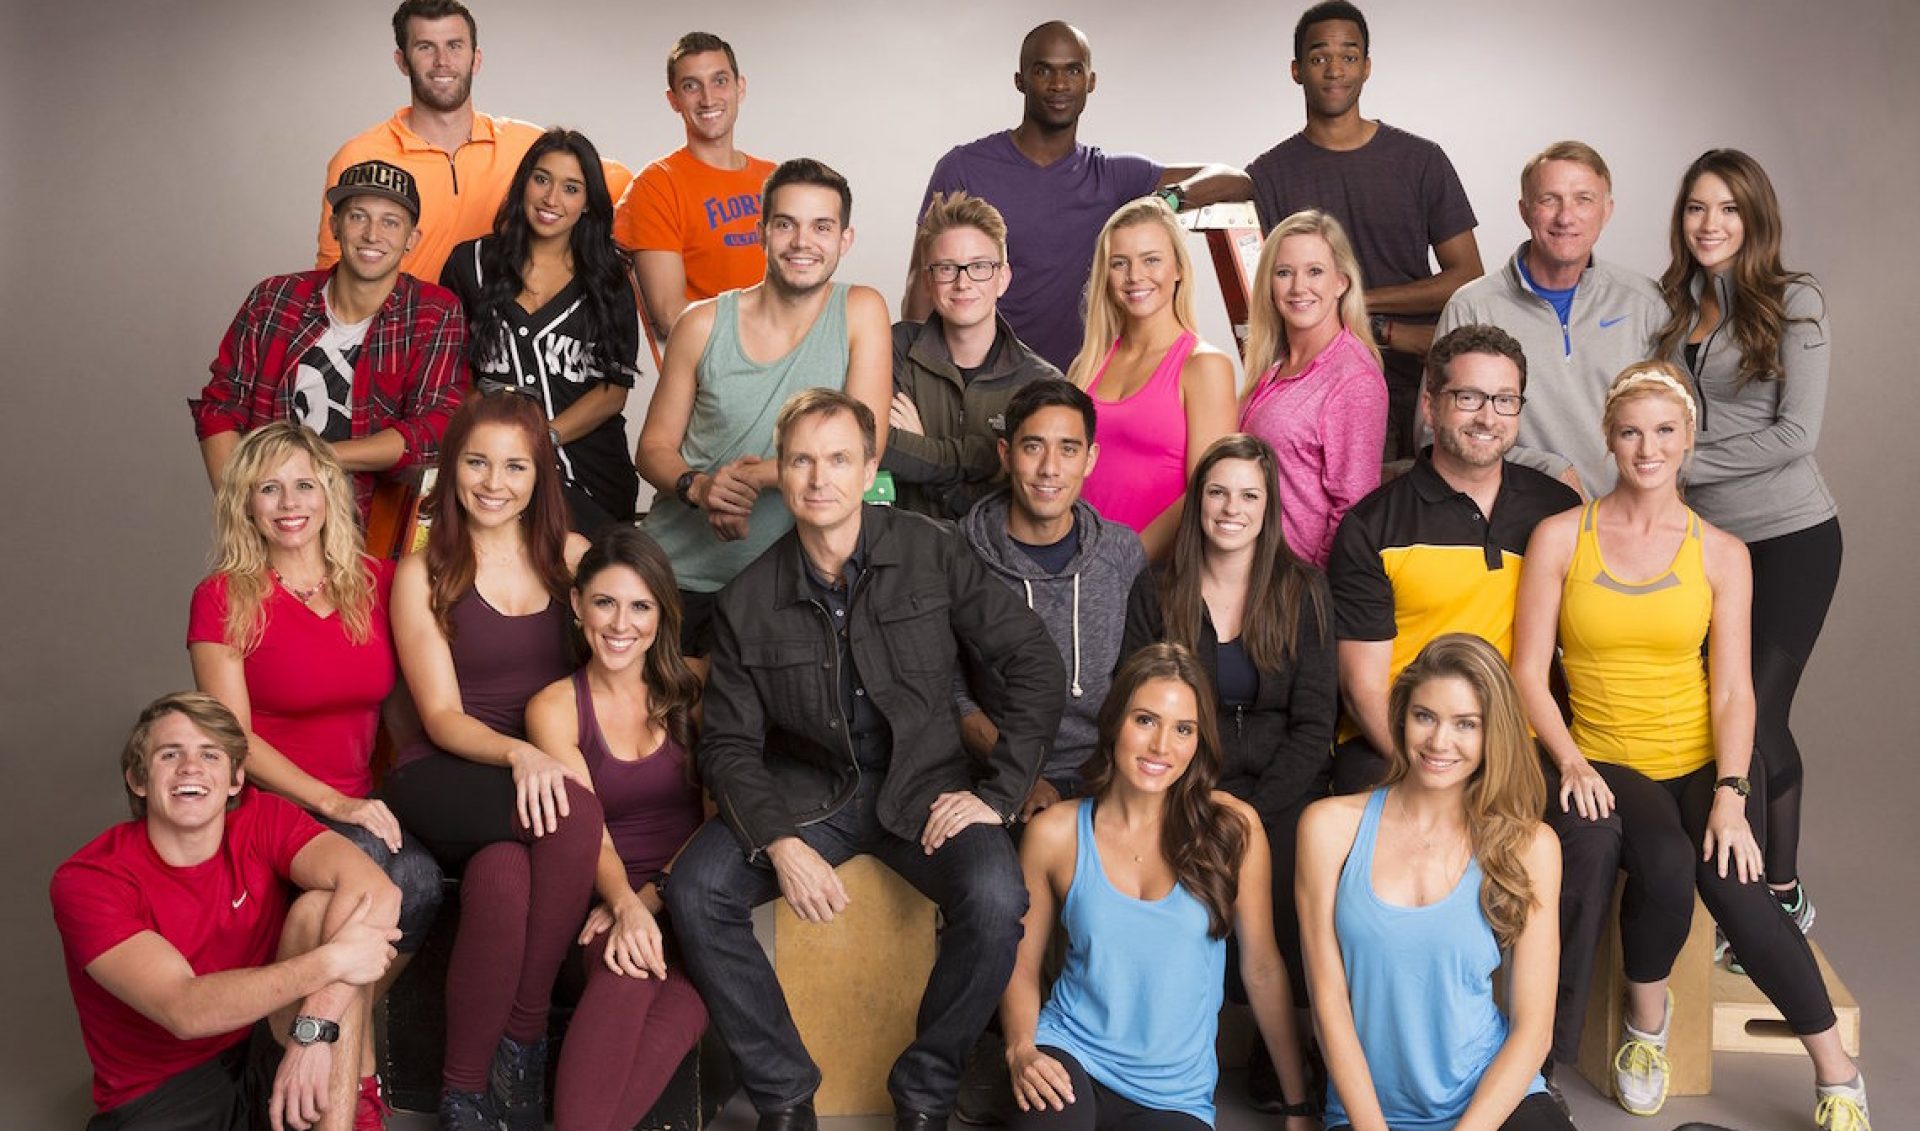 ‘The Amazing Race’ Season 28 Introduction: Get Ready, Get Set, Influence!